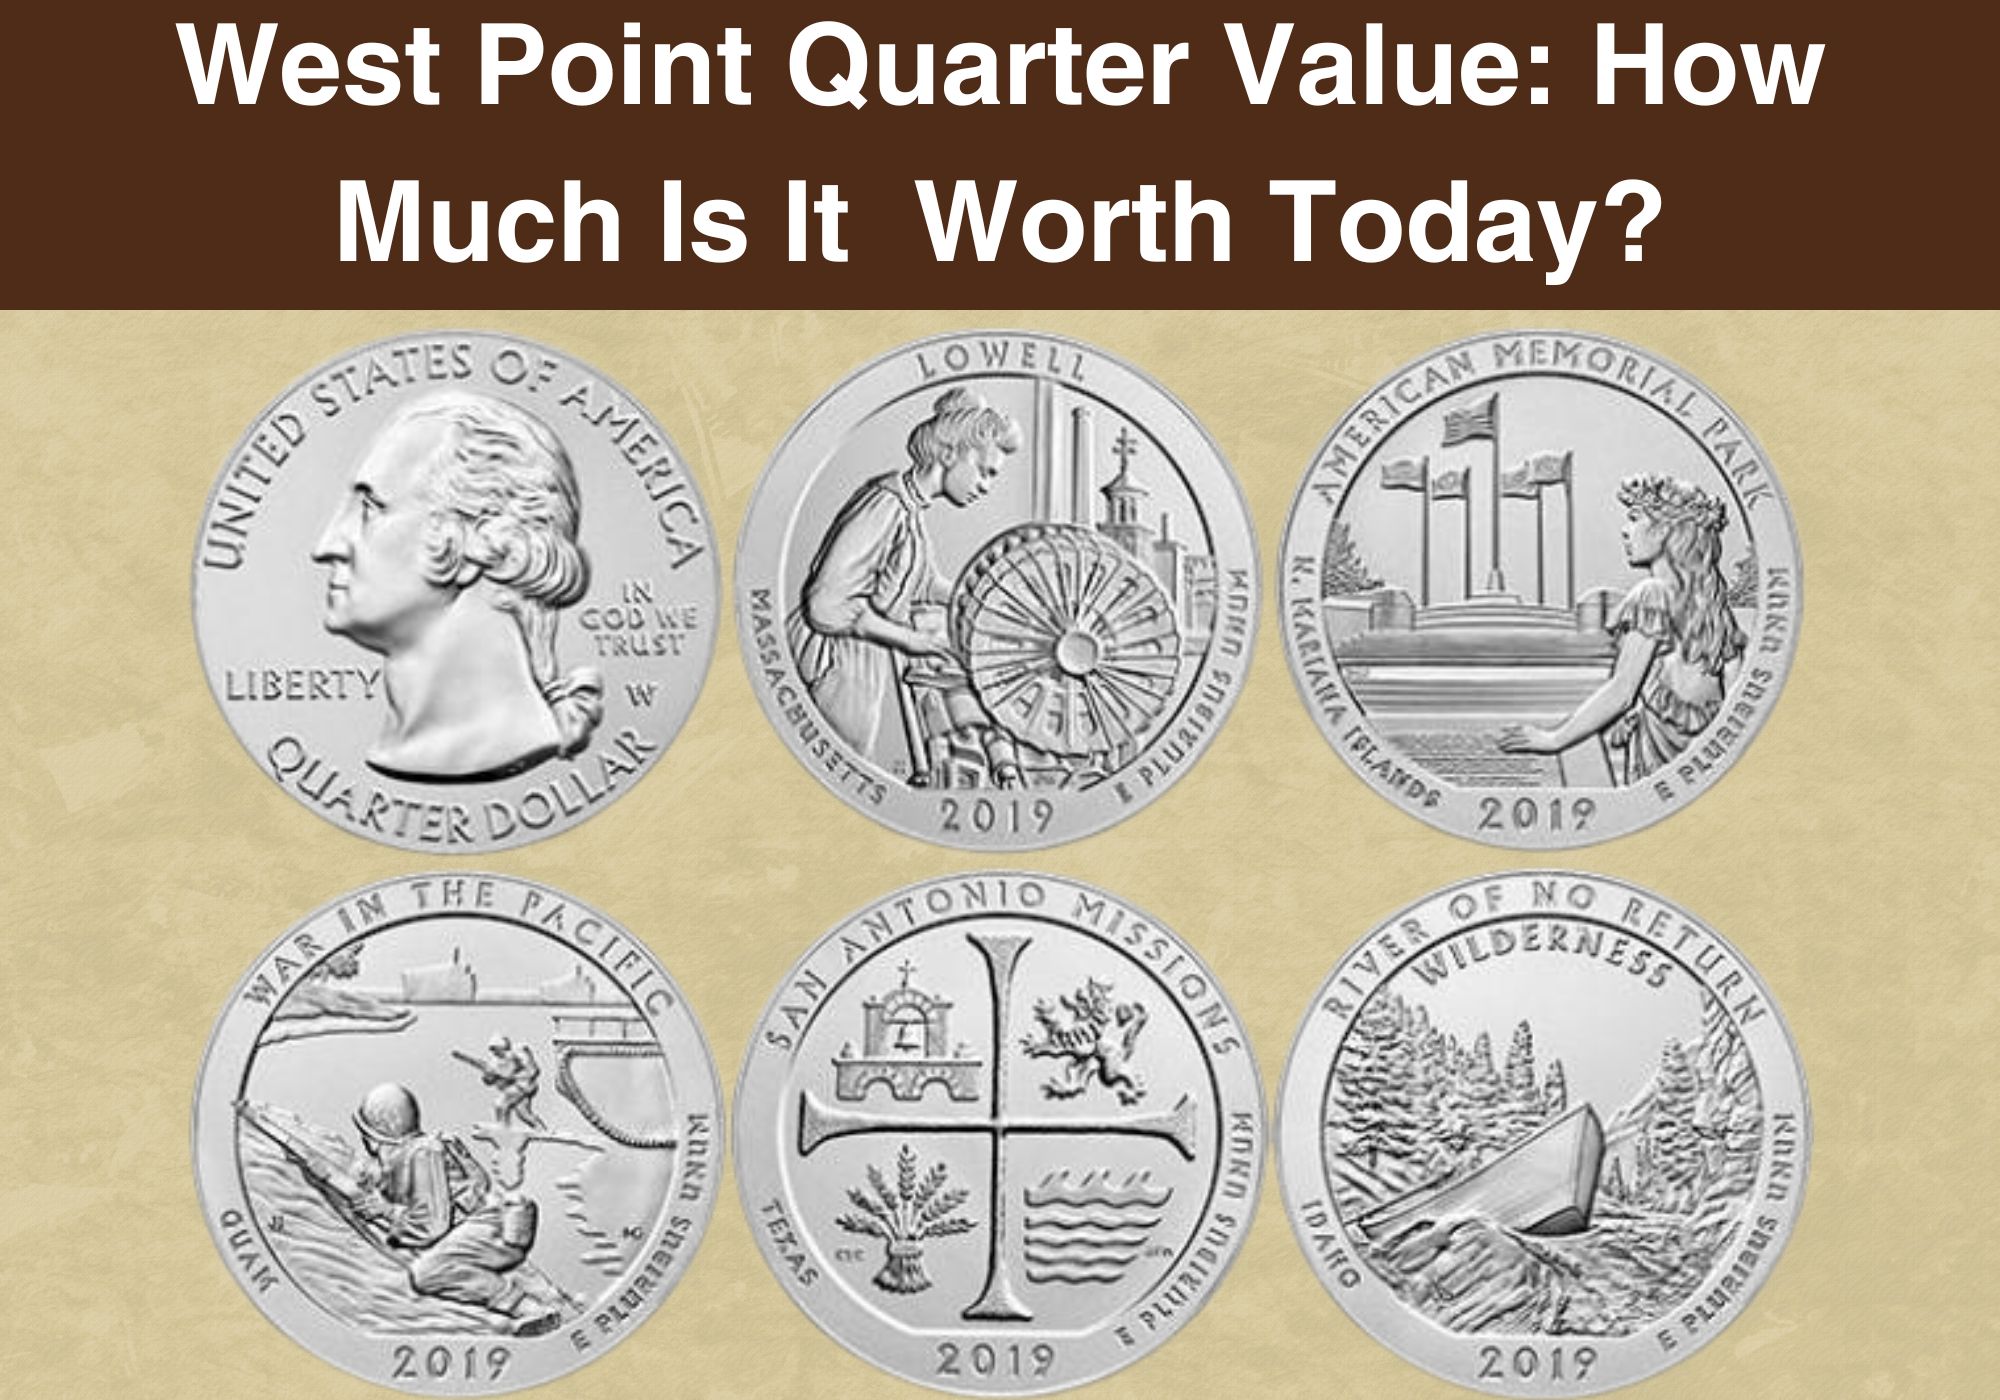 West Point Quarter Value How Much Is It Worth Today